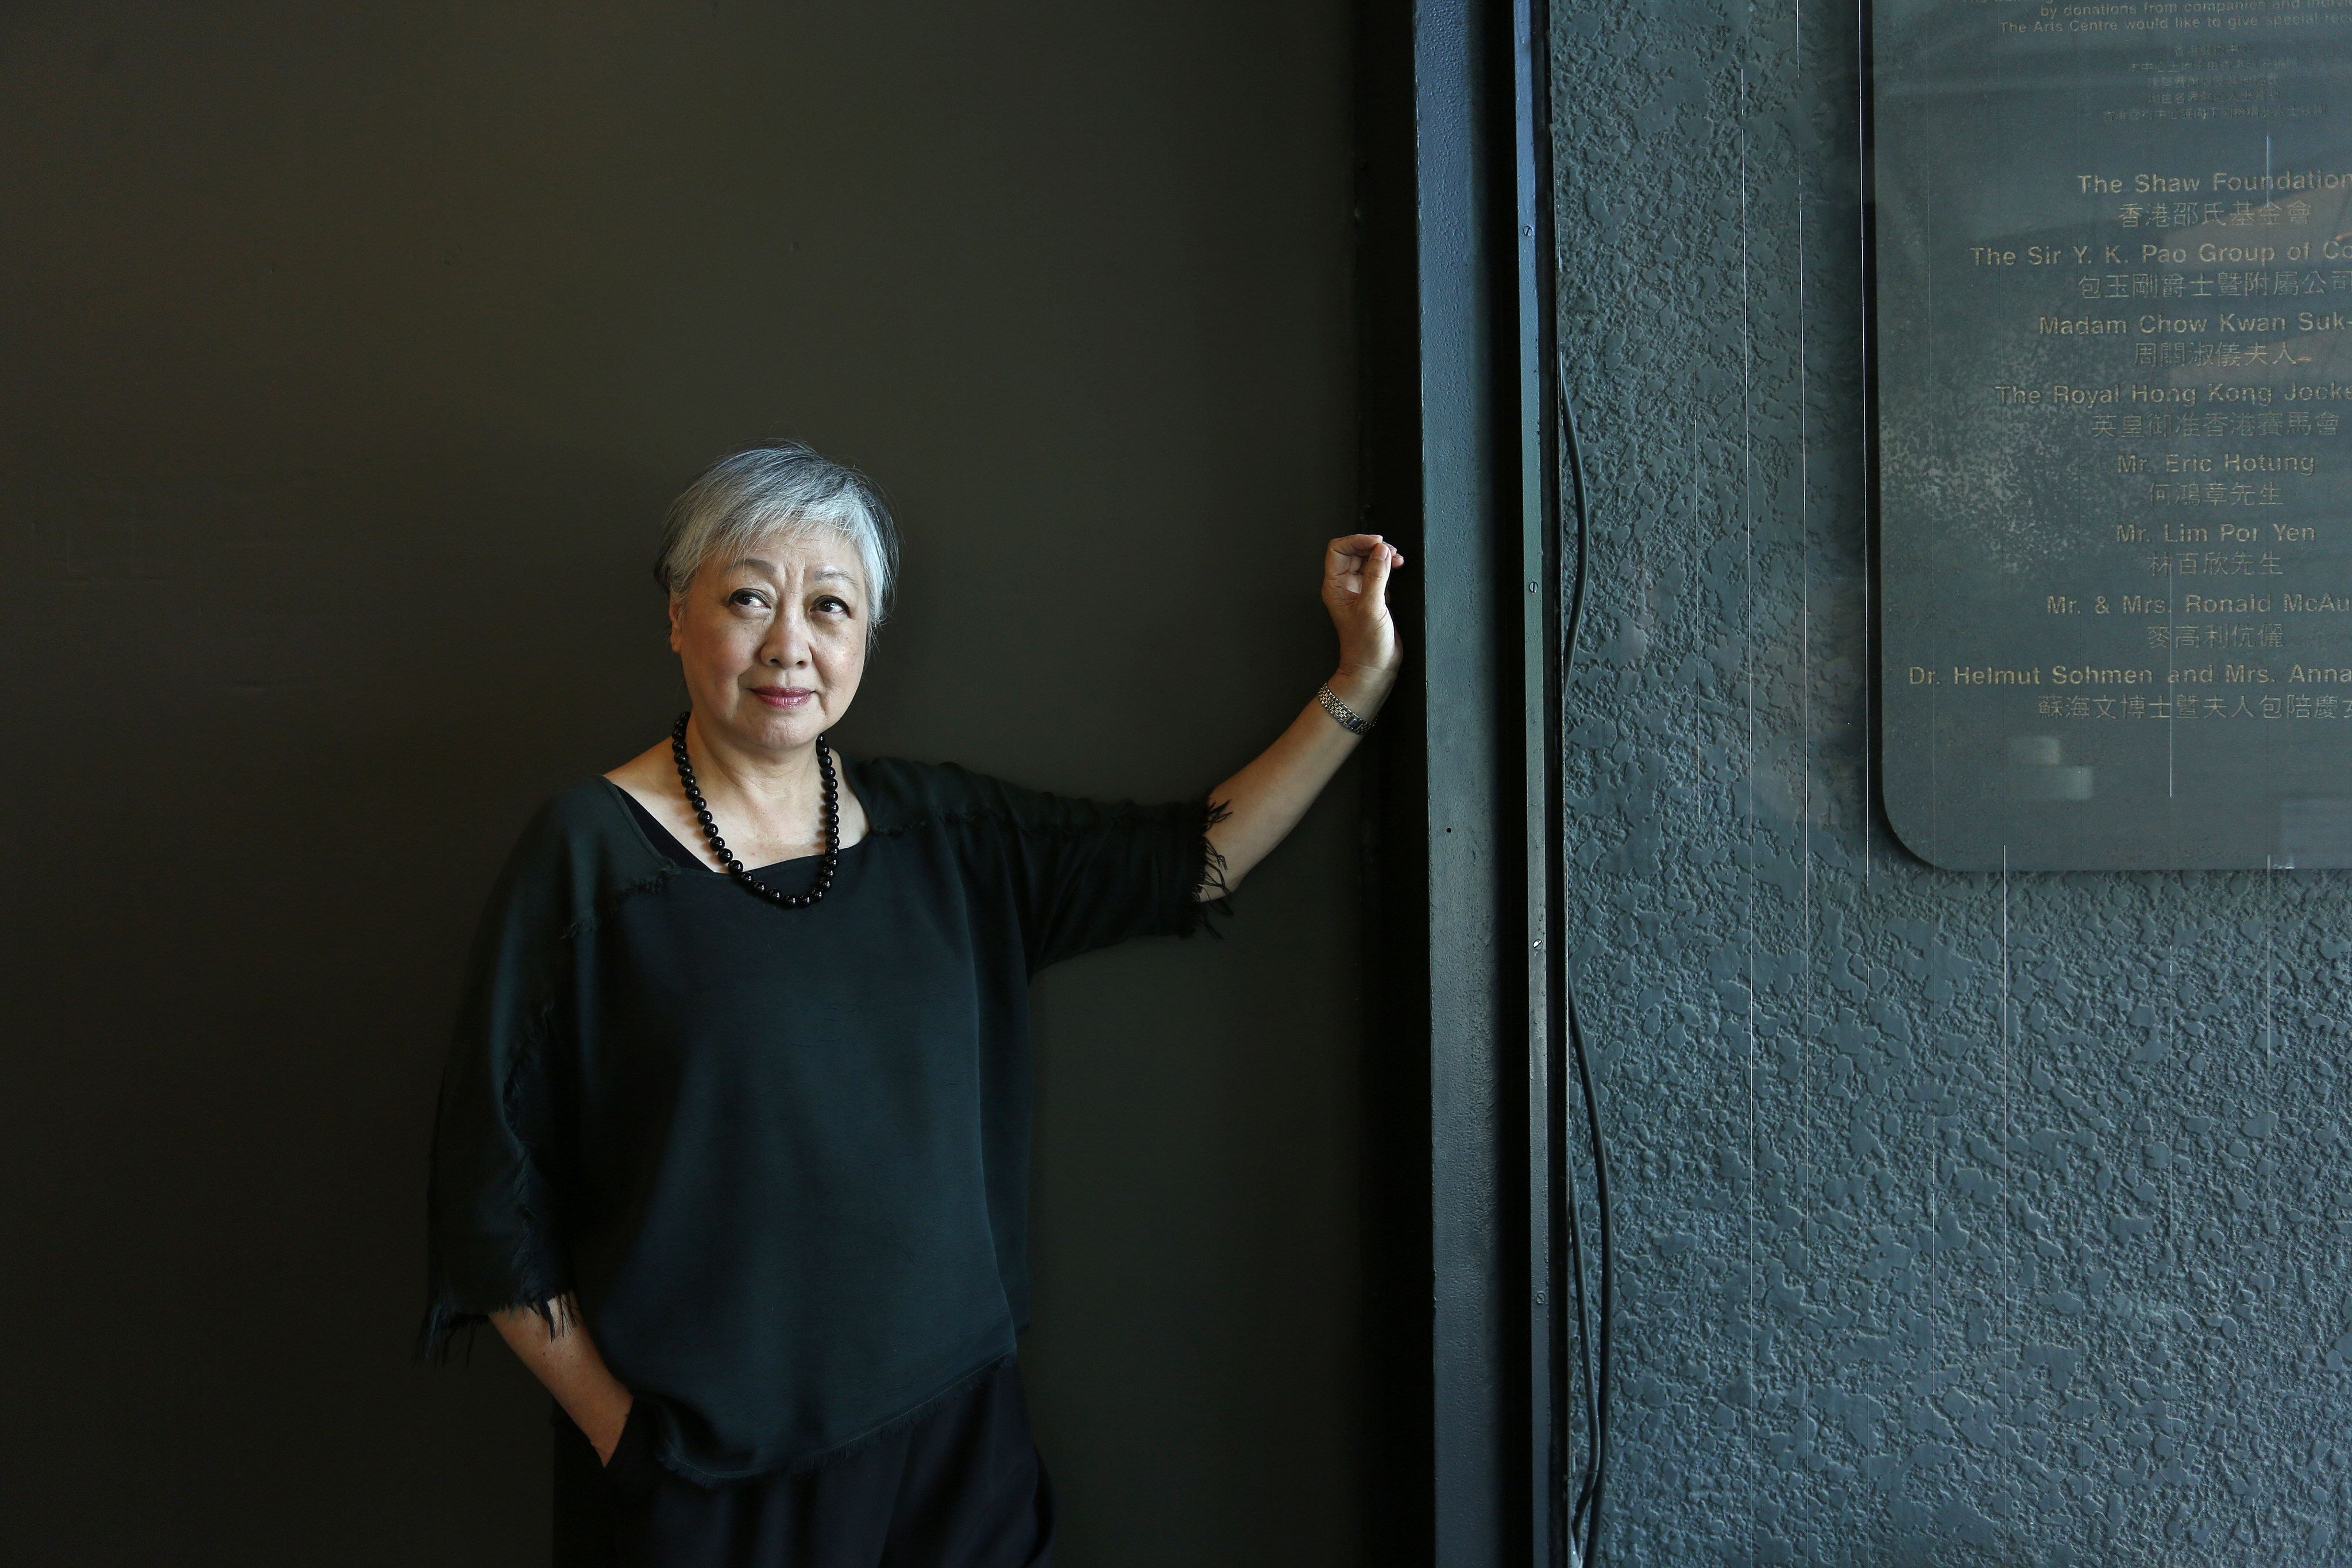 Tisa Ho, executive director of the Hong Kong Arts Festival. She will retire in November after 16 years at the helm. Photo: Jonathan Wong